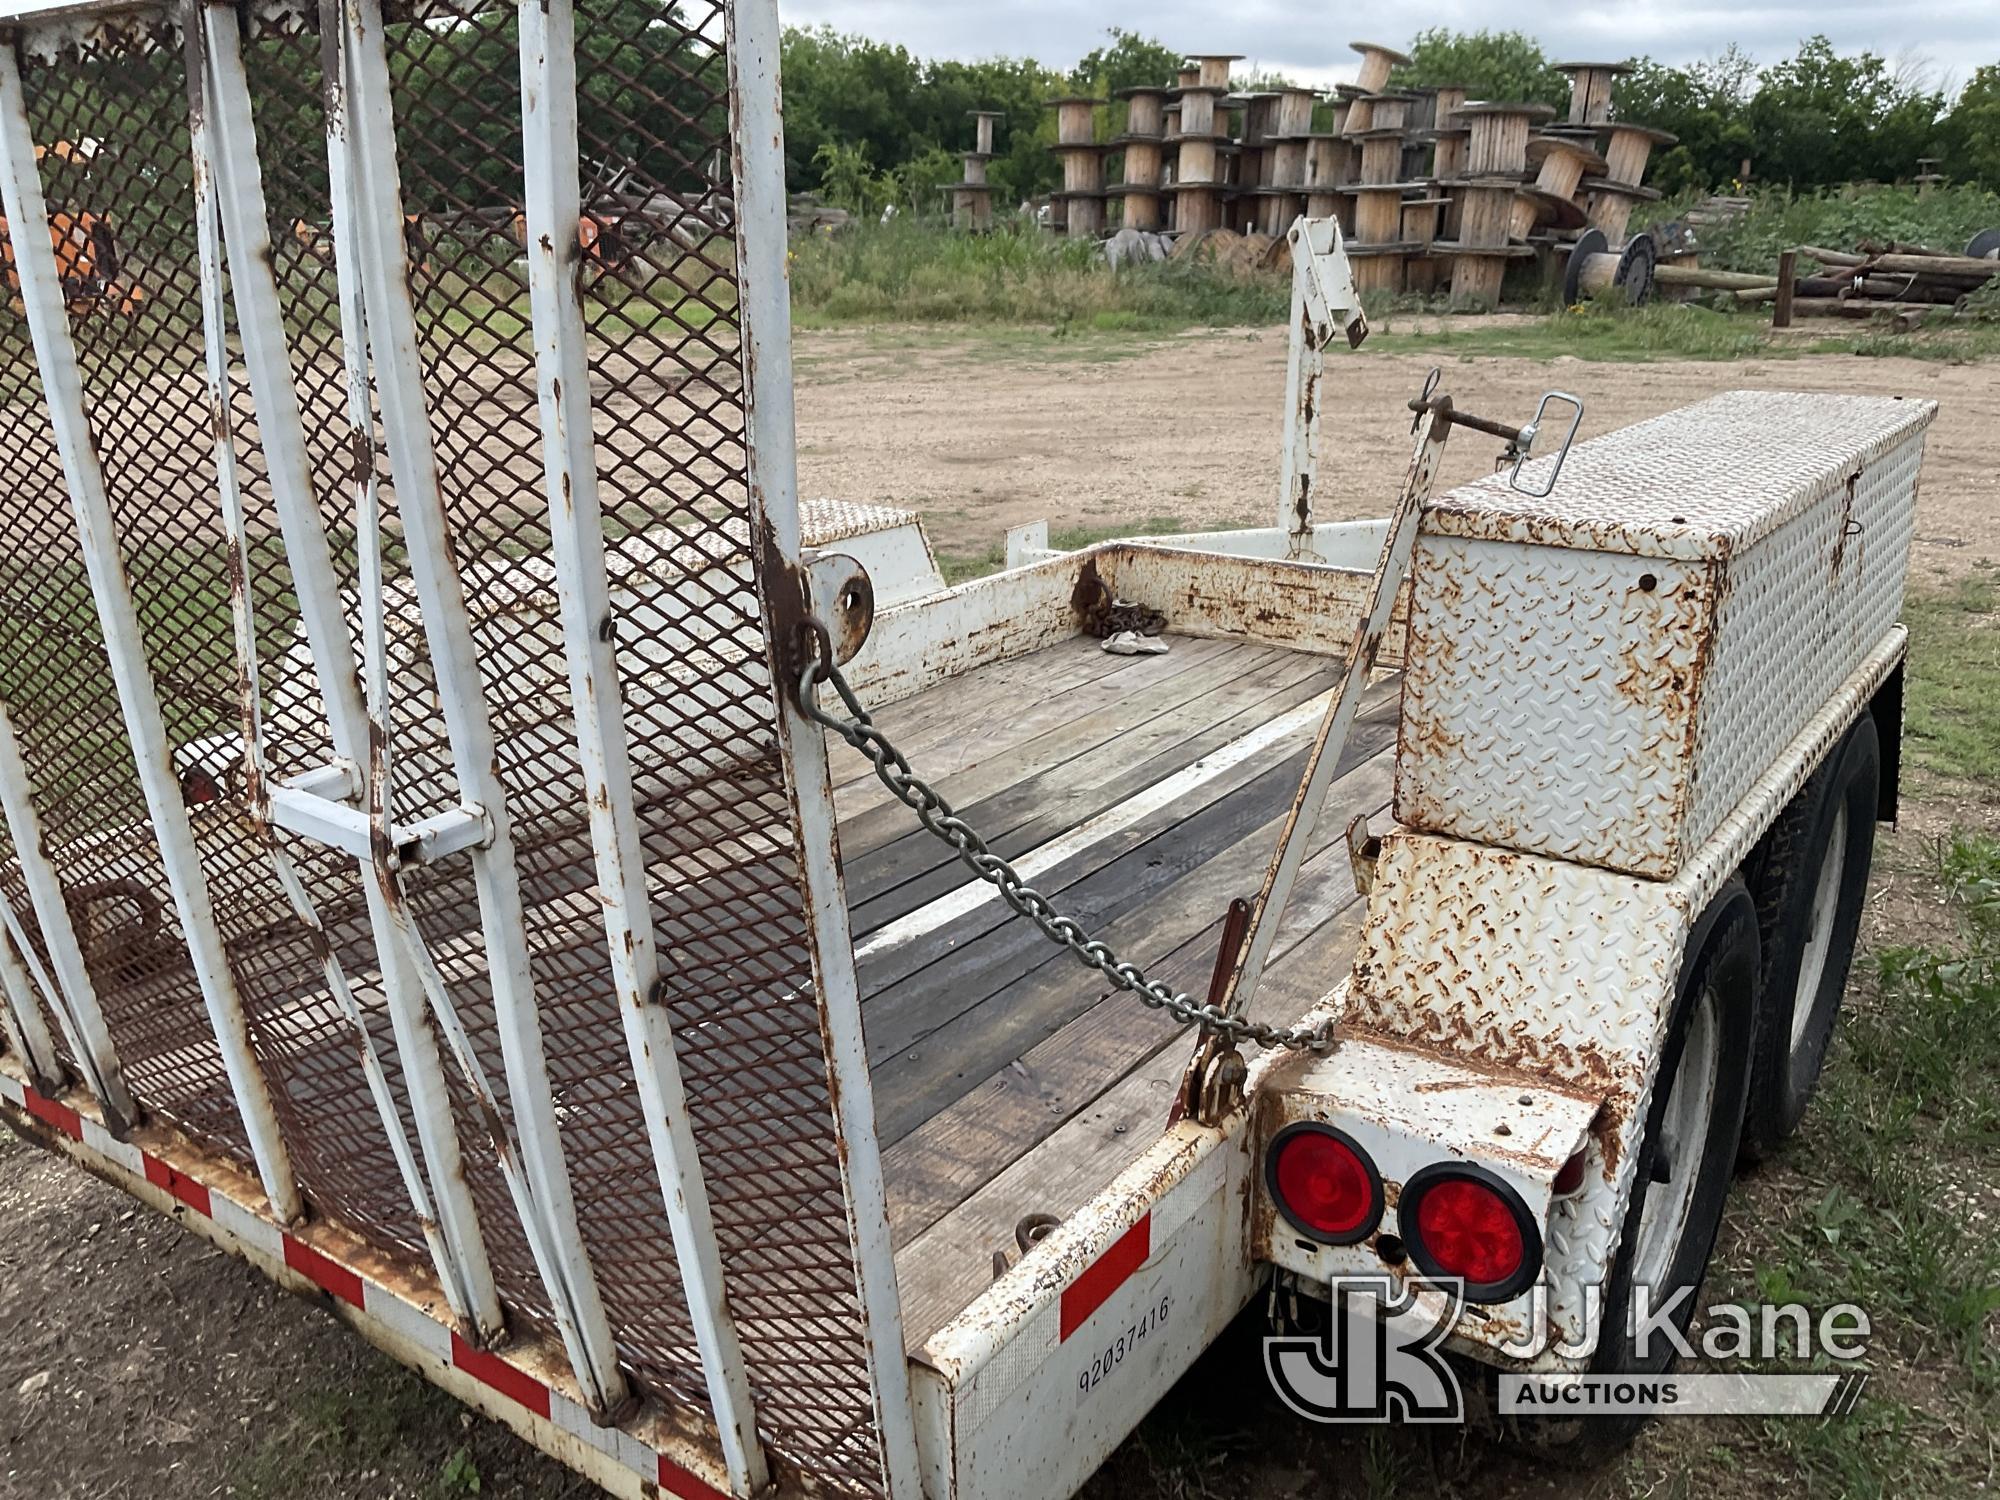 (San Antonio, TX) 2003 Pitman Panther Backyard Digger Derrick, To be sold together with Tandem Axle